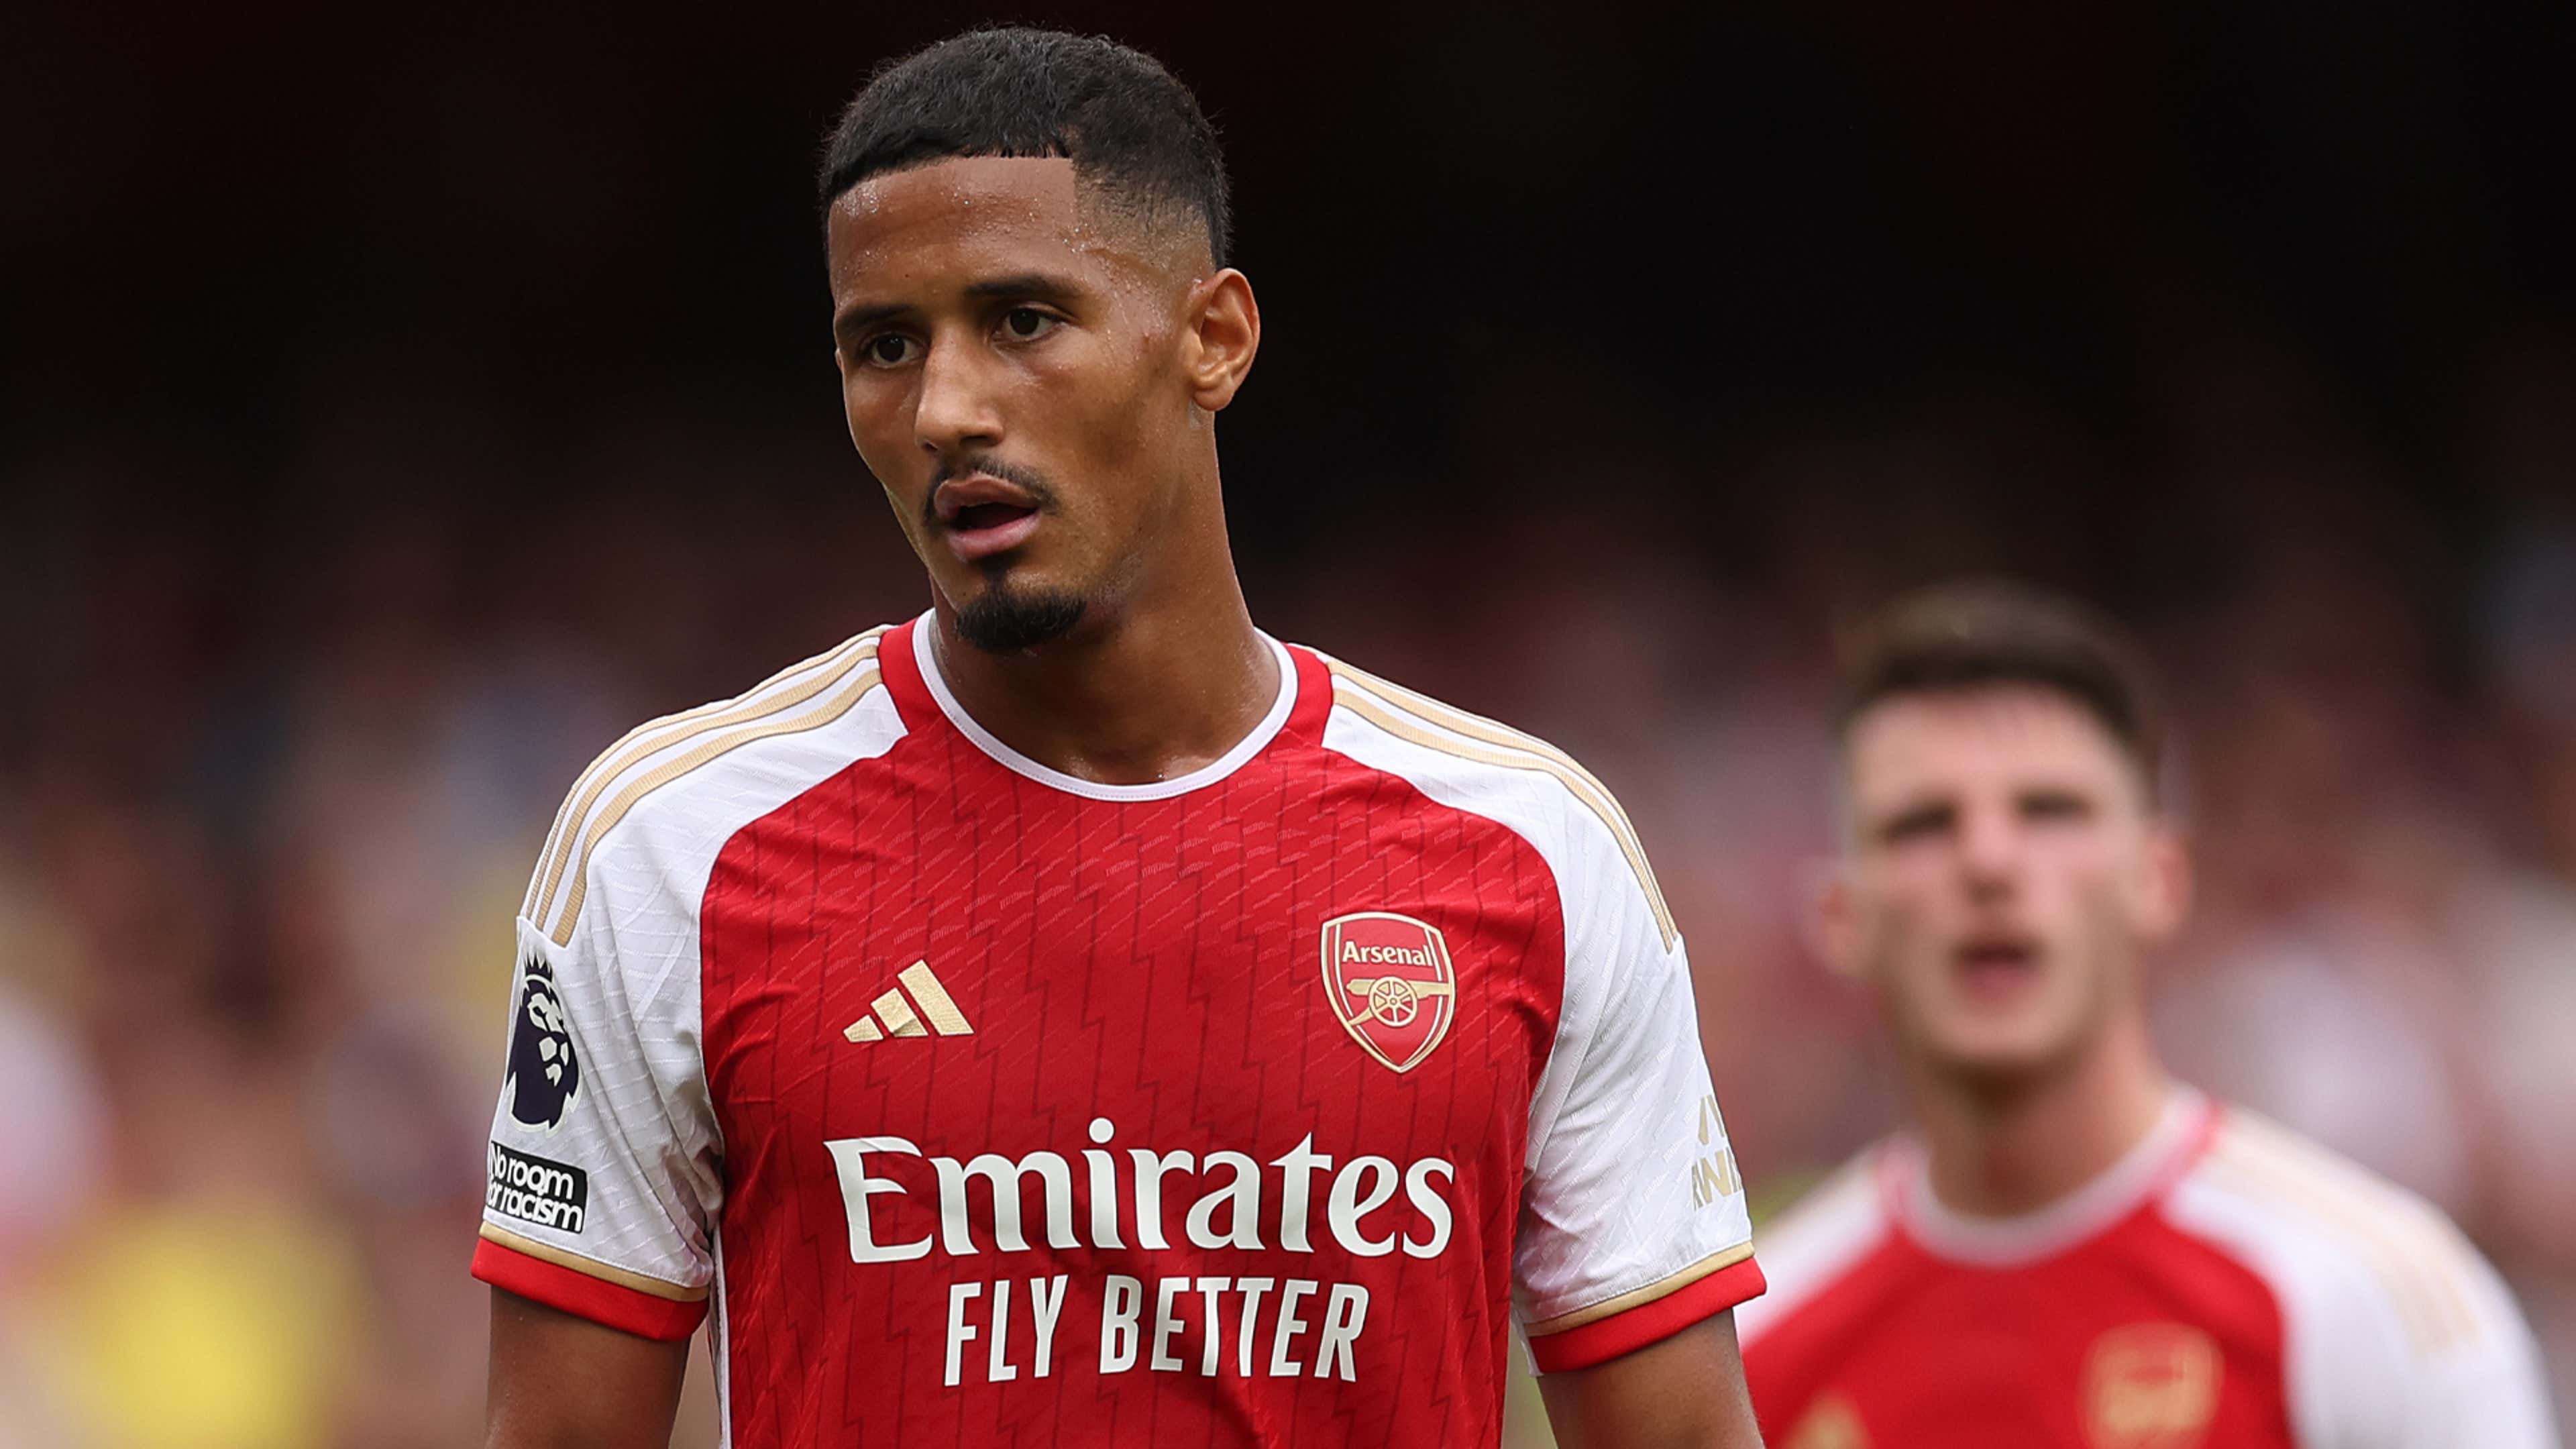 The Arsenal players on international duty and how to watch